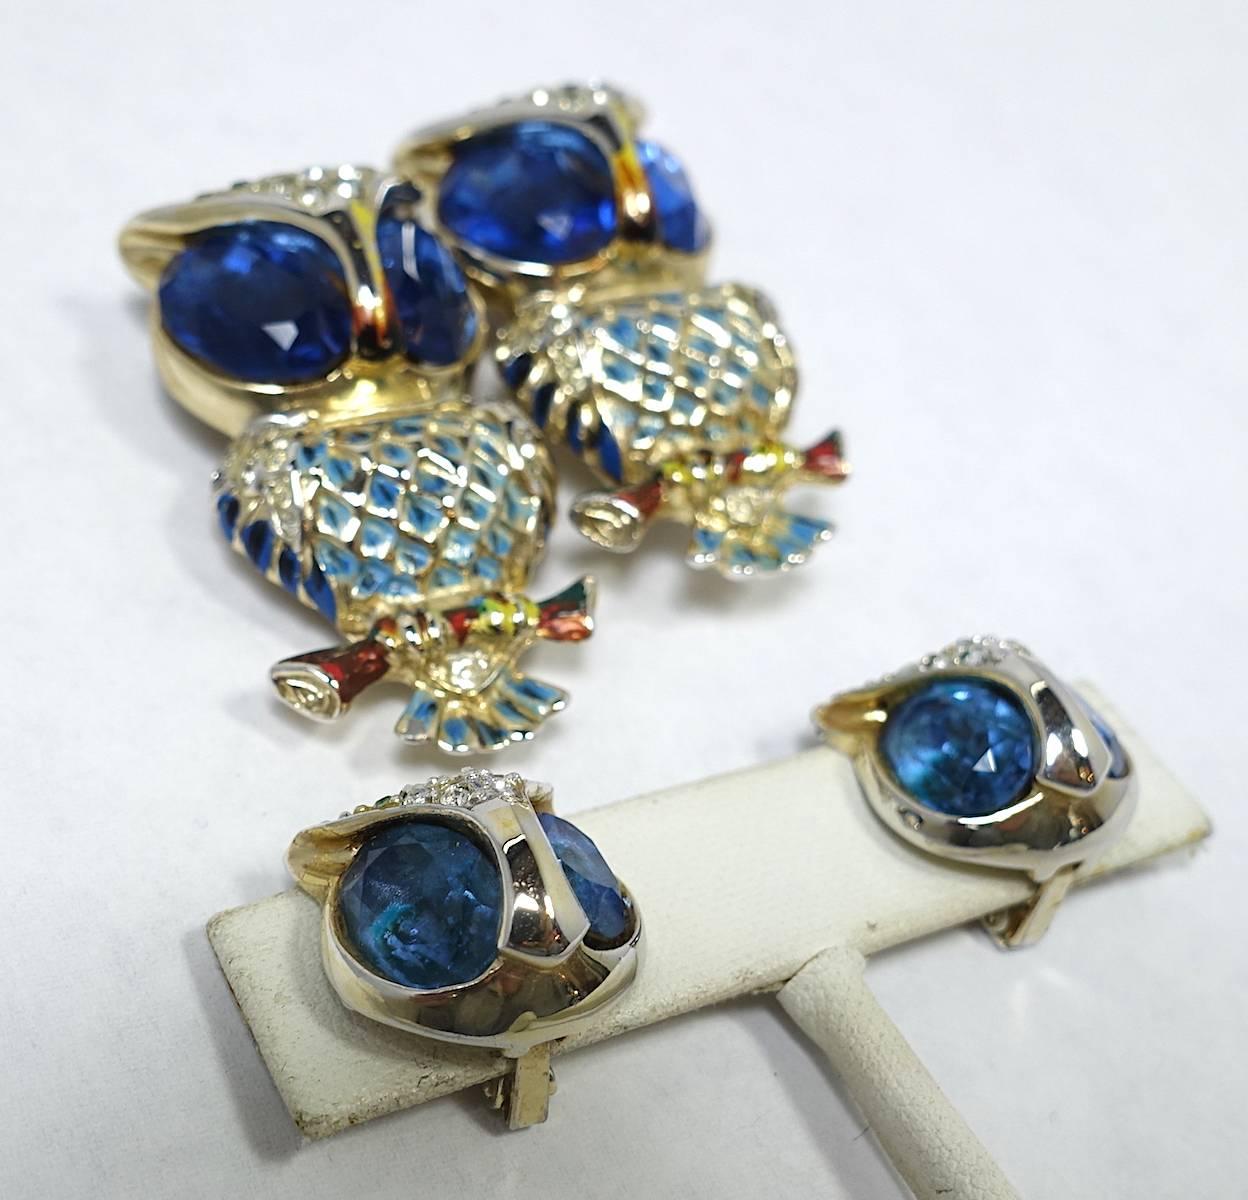 This famous vintage owl duette & earrings set by Coro Craft is featured in many of the popular jewelry books.  The owls are perched on a tree branch. They have large blue rhinestone eyes.  The body has clear rhinestones with multi-color enameling